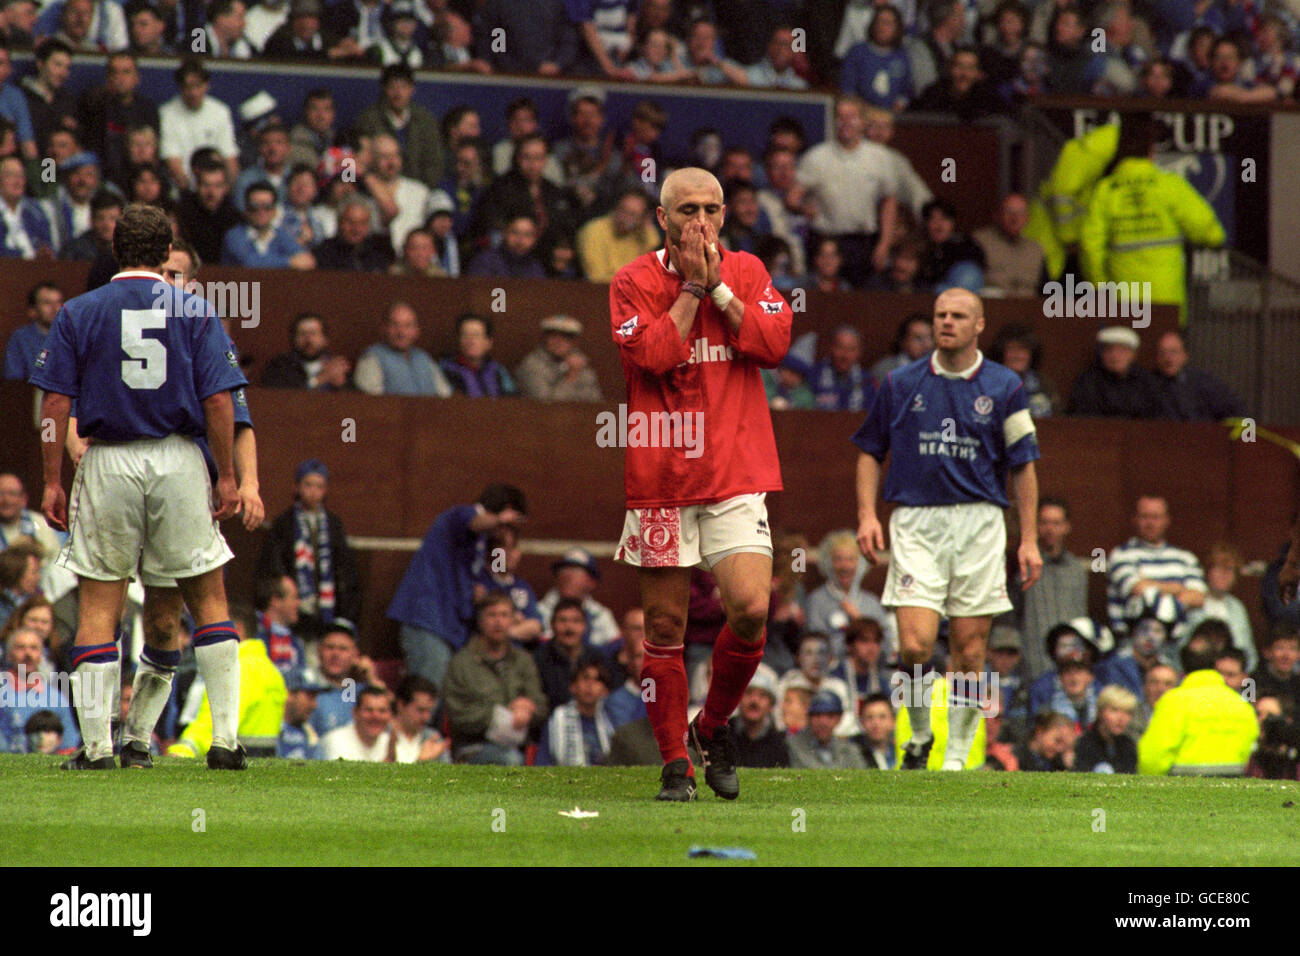 Football - FA Cup Semi Final - Chesterfield v Middlesbrough - Old Trafford Banque D'Images